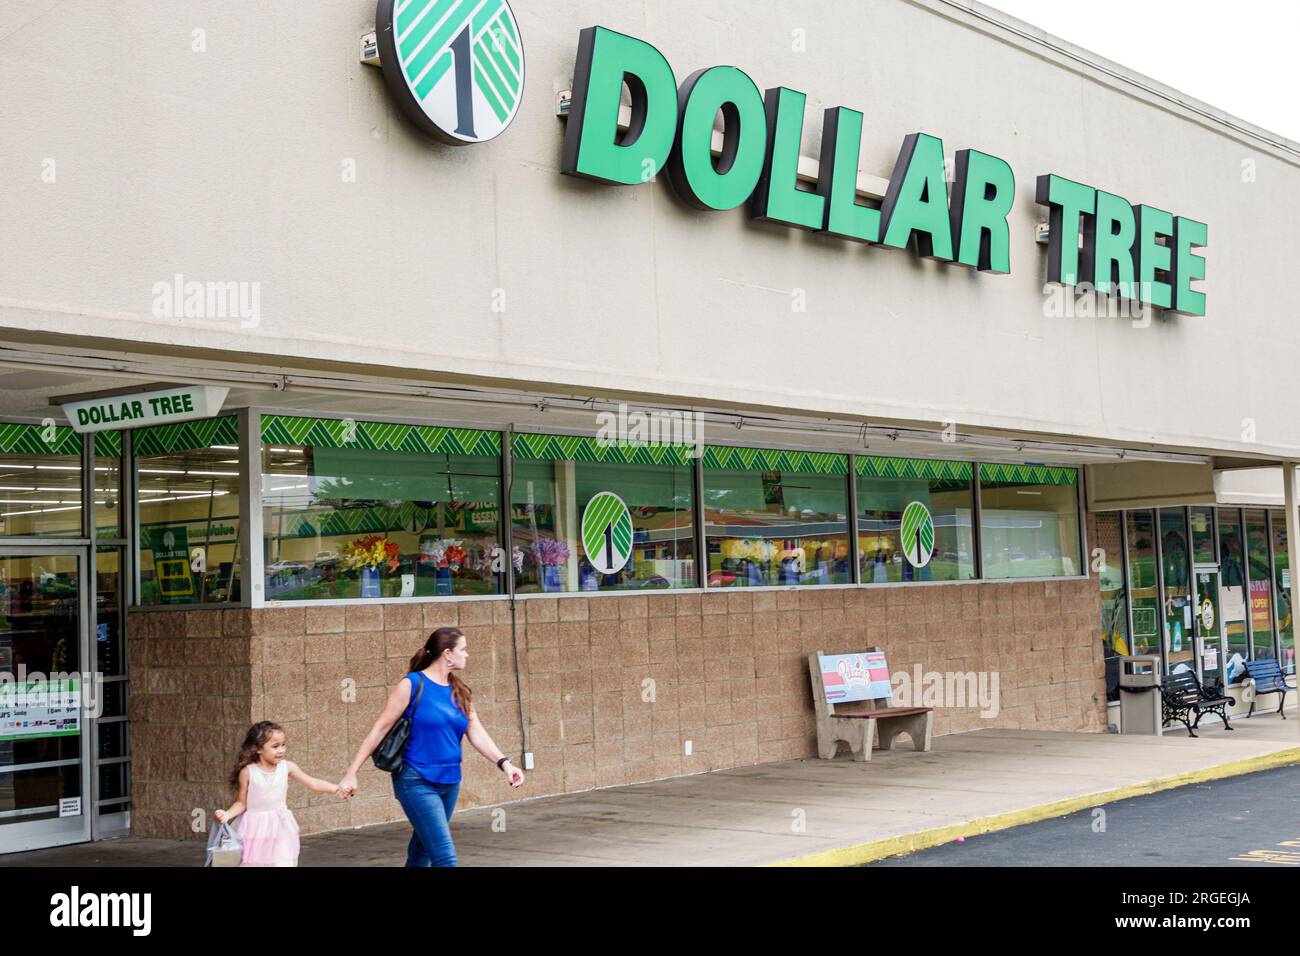 Gastonia North Carolina,Dollar Tree discount,child children childhood,kid,girl female residents,family parent mother daughter,outside exterior,buildin Stock Photo